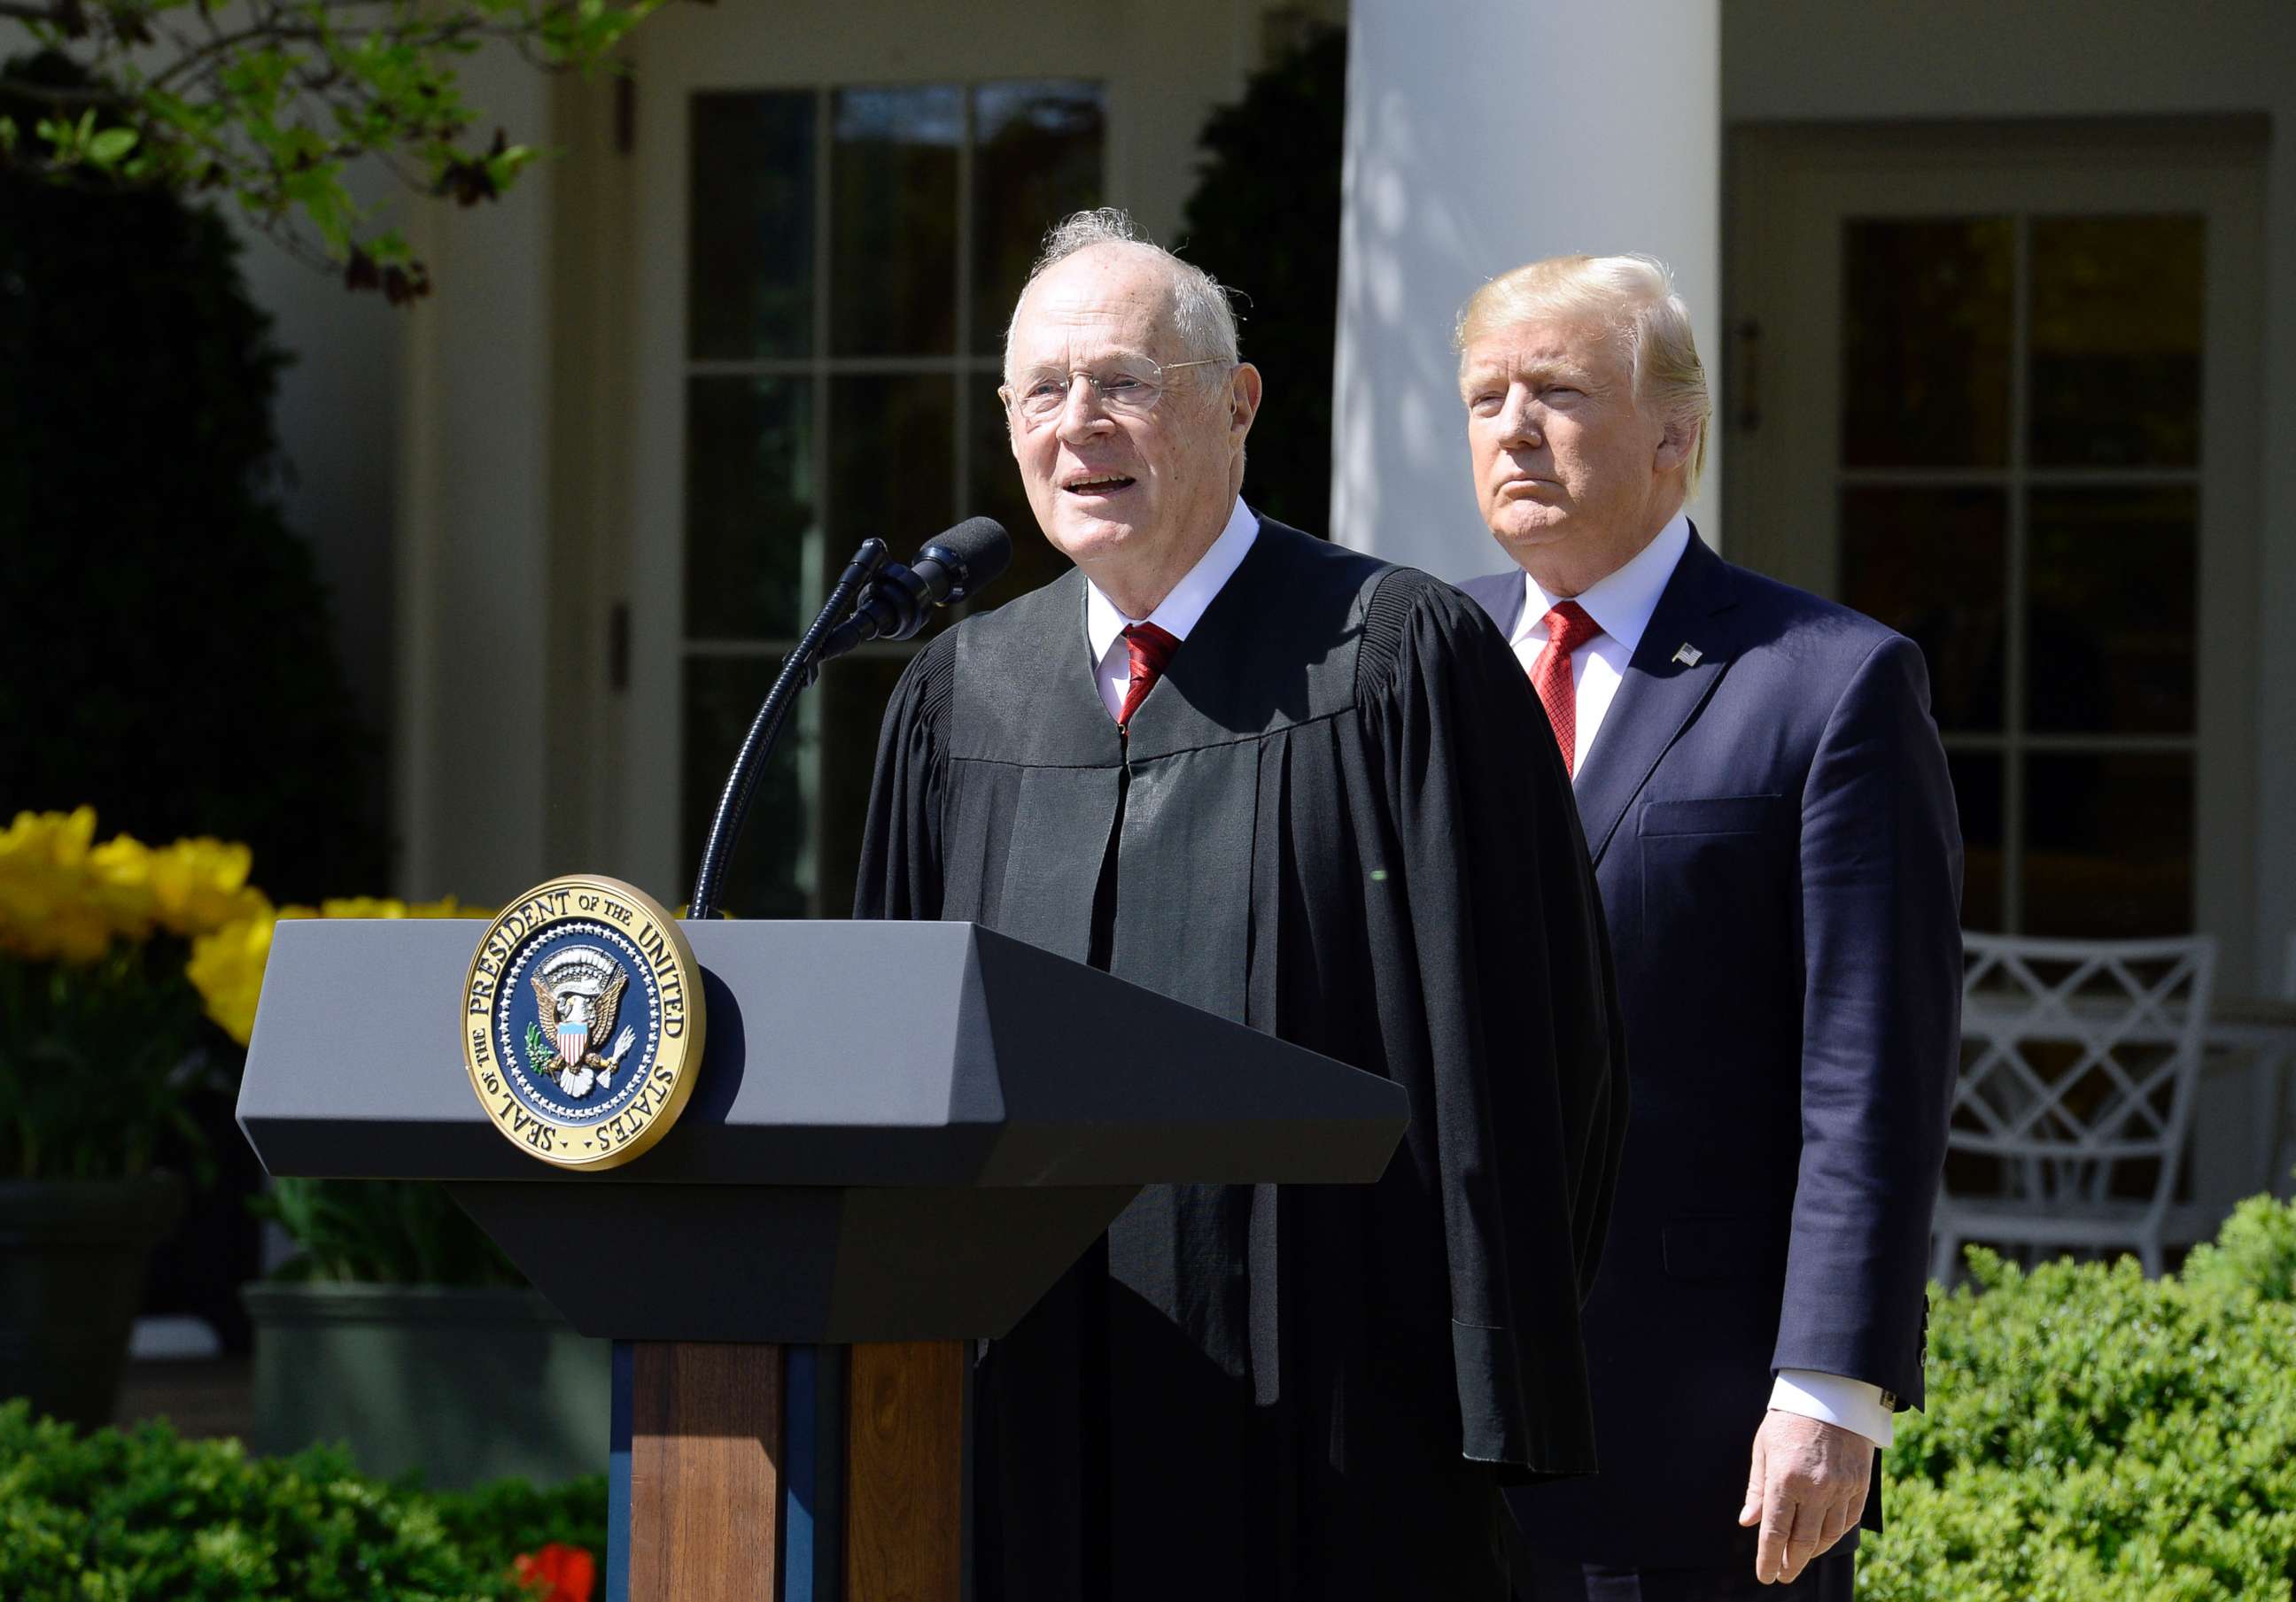 PHOTO: Justice Anthony Kennedy speaks as President Donald trump looks on before Neil Gorsuch is swearing in as an Associate Justice of the Supreme Court during a ceremony at the White House Rose Garden, April 10, 2017, in Washington.